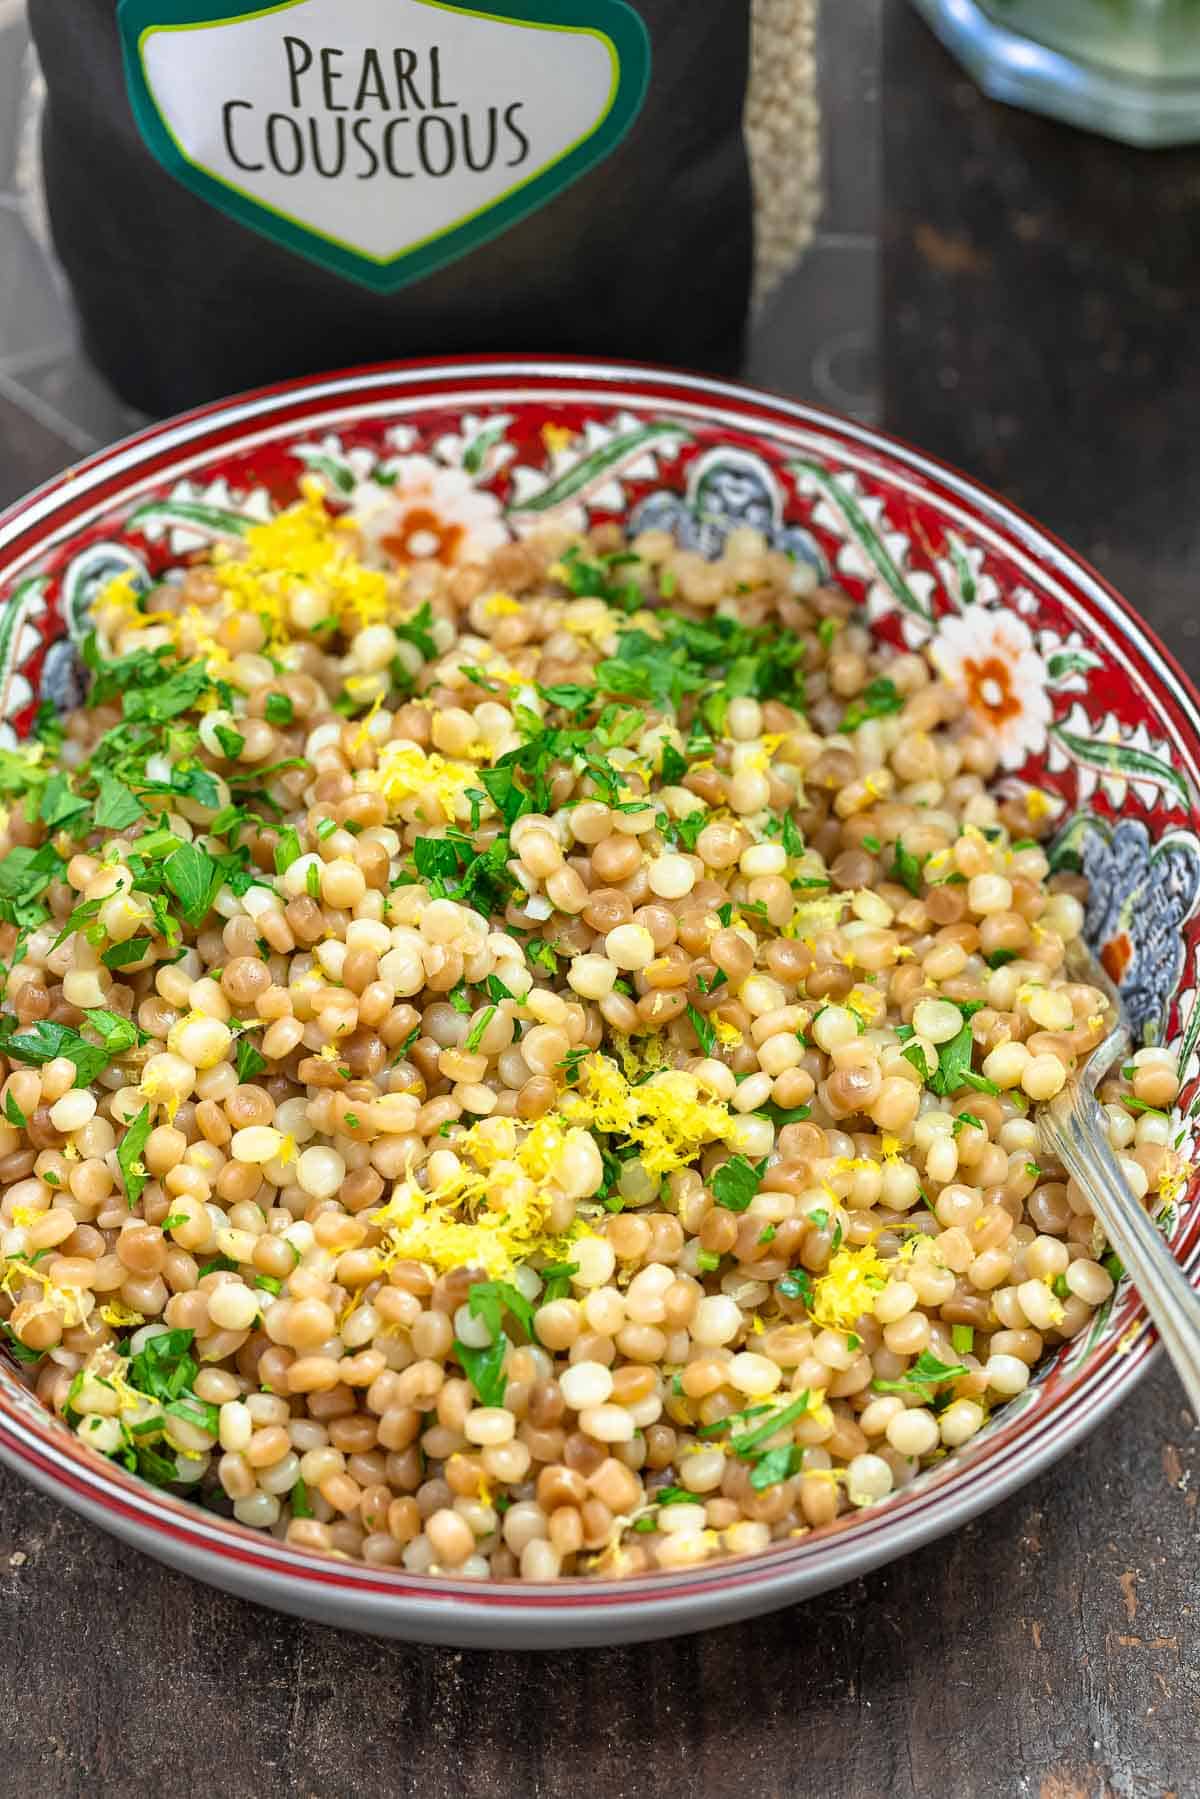 Pearl couscous in a bowl with a bag of The Mediterranean Dish Pearl Couscous in the background.